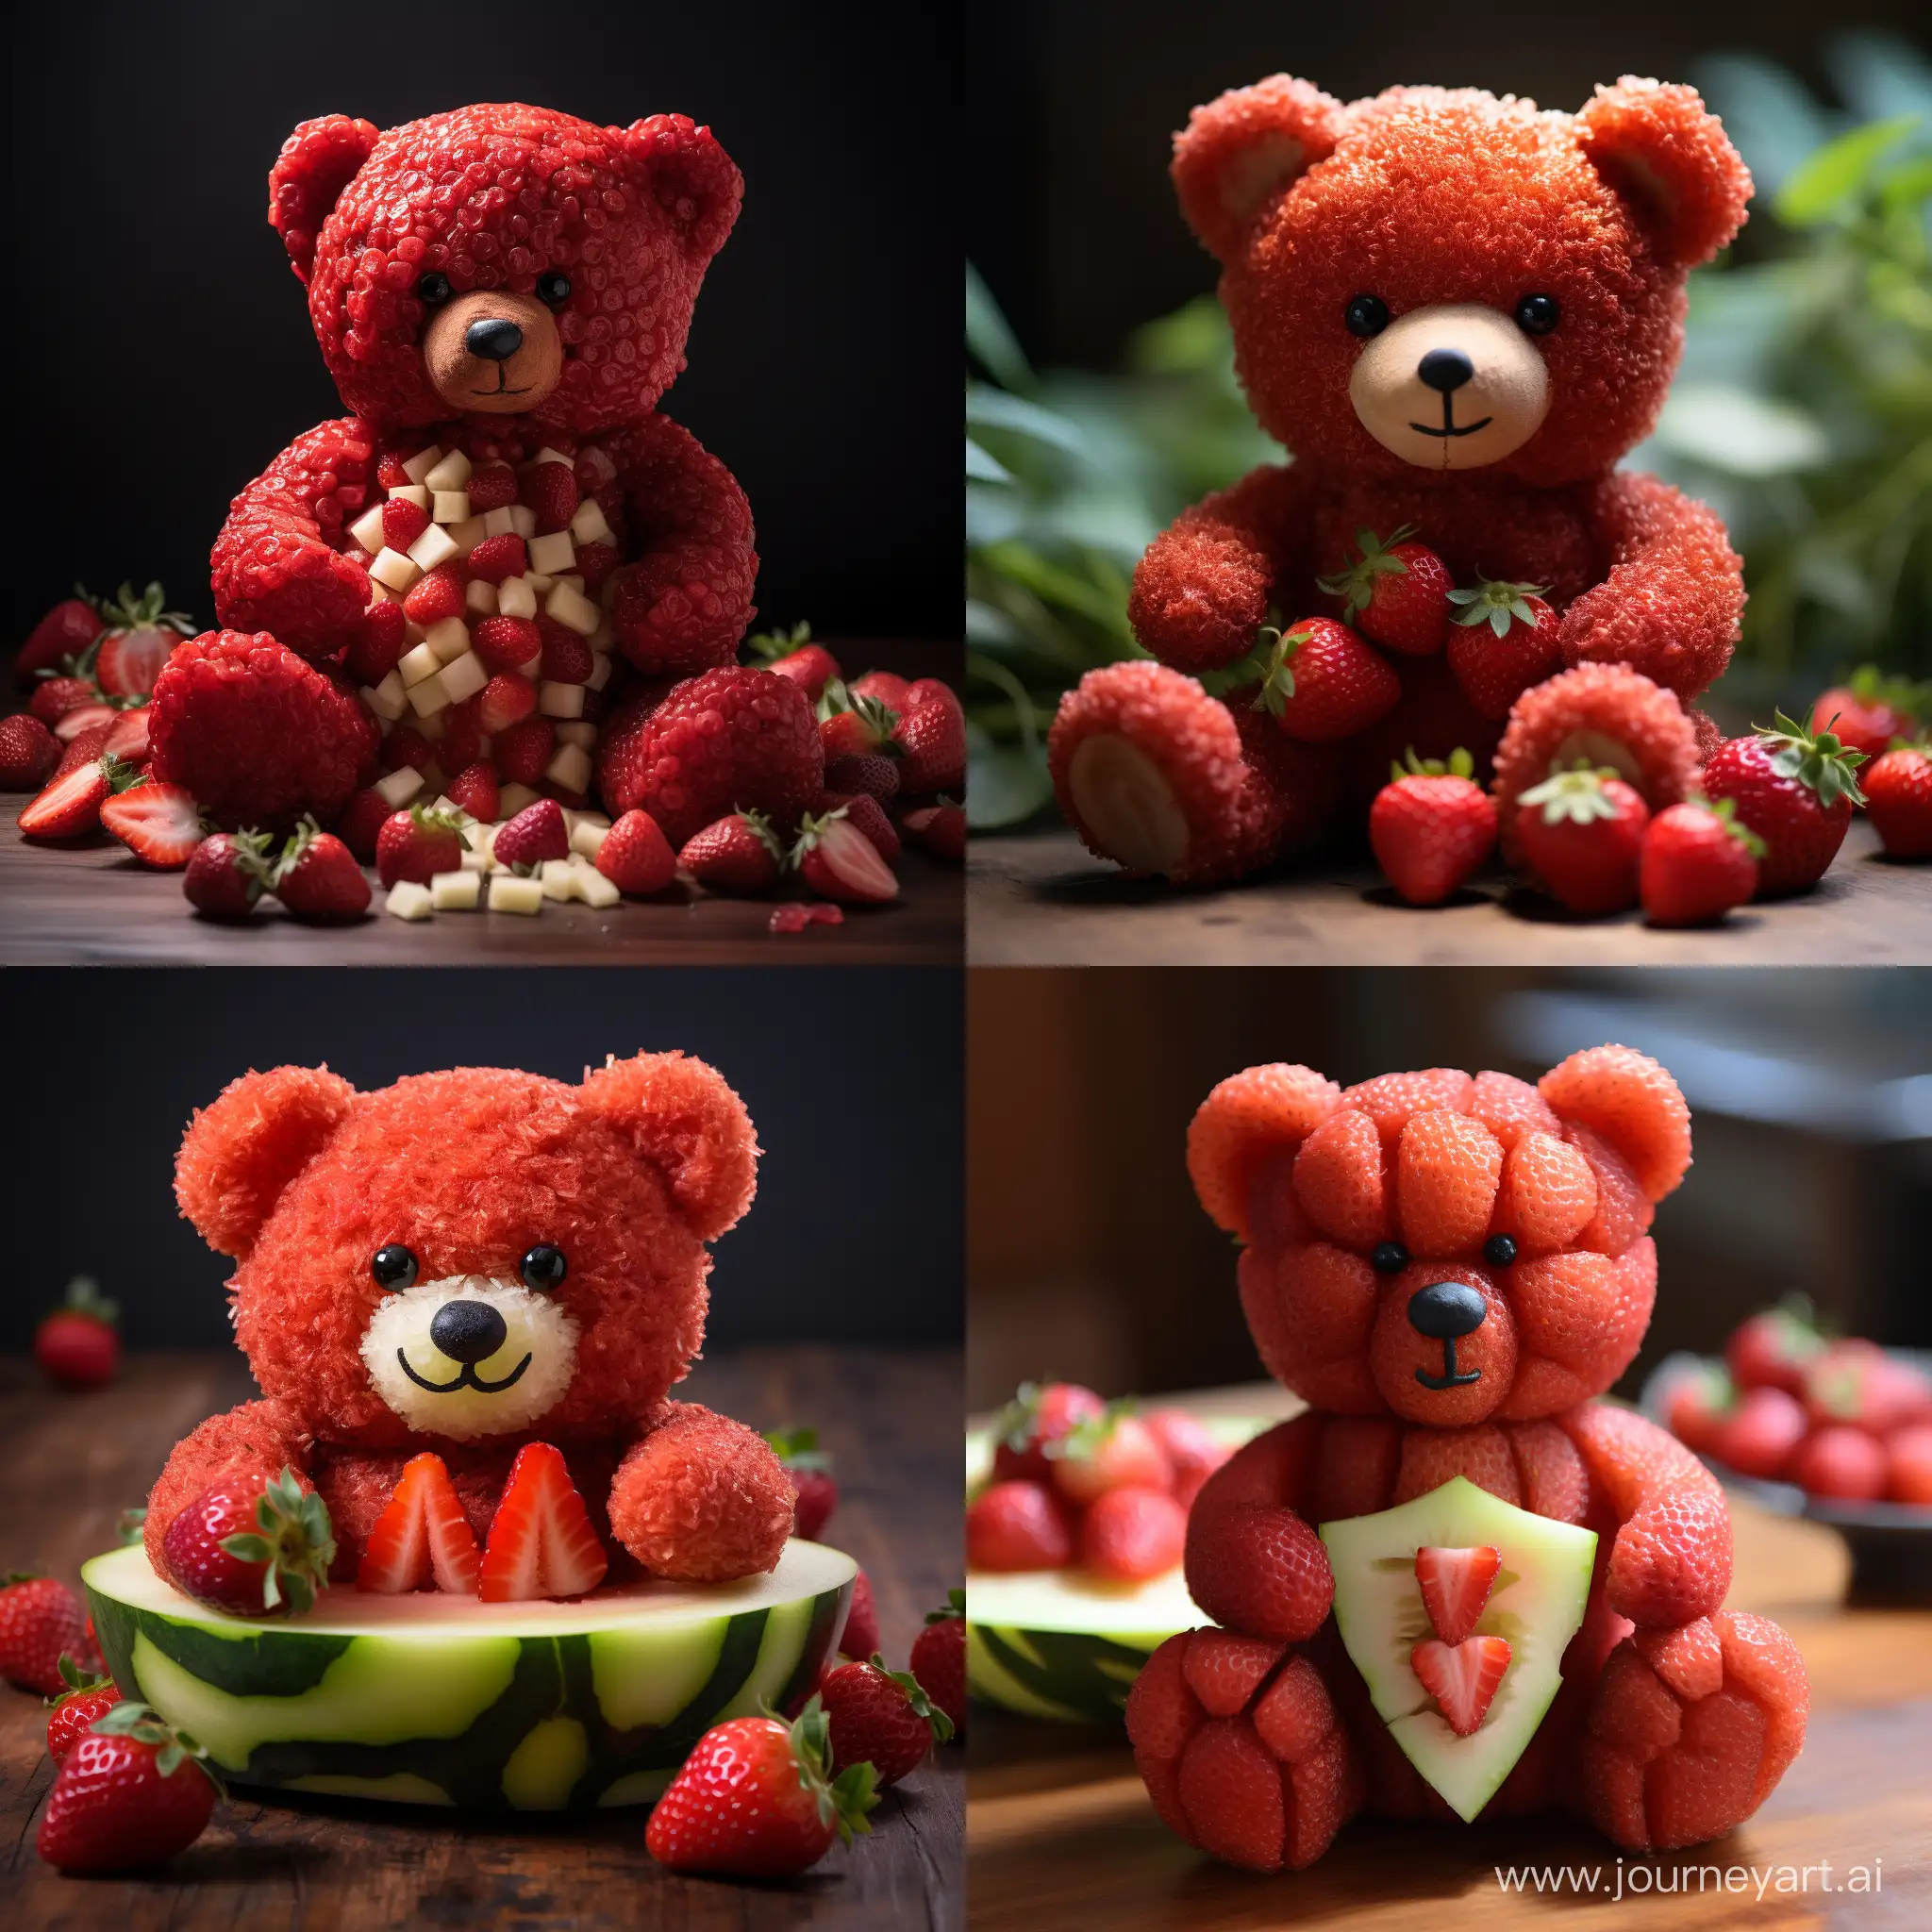 A photo of teddy bear made of strawberries